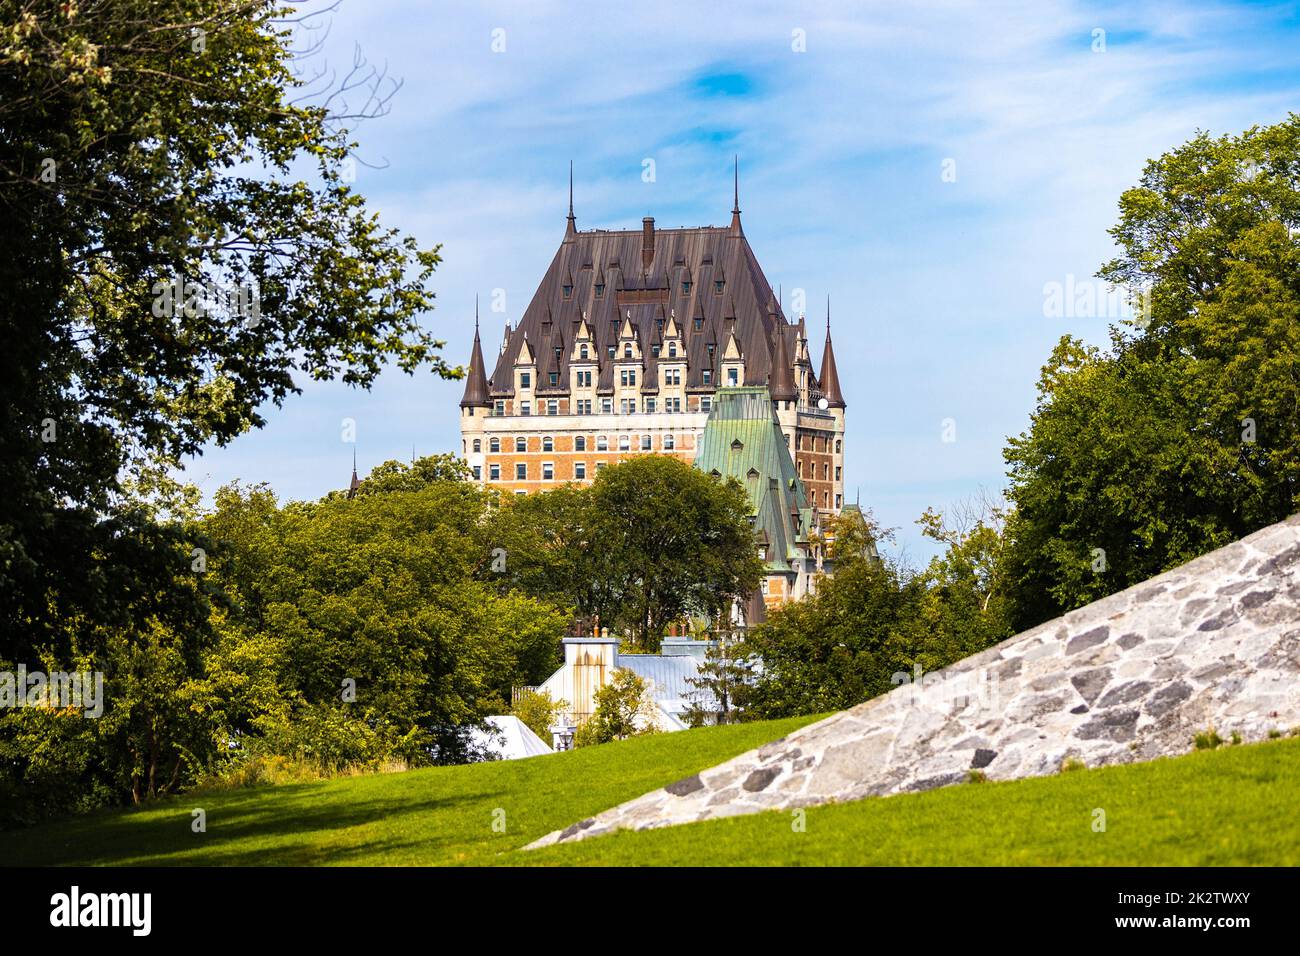 Scenic view of Chateau Frontenac castle hotel from the citadel in Quebec Stock Photo